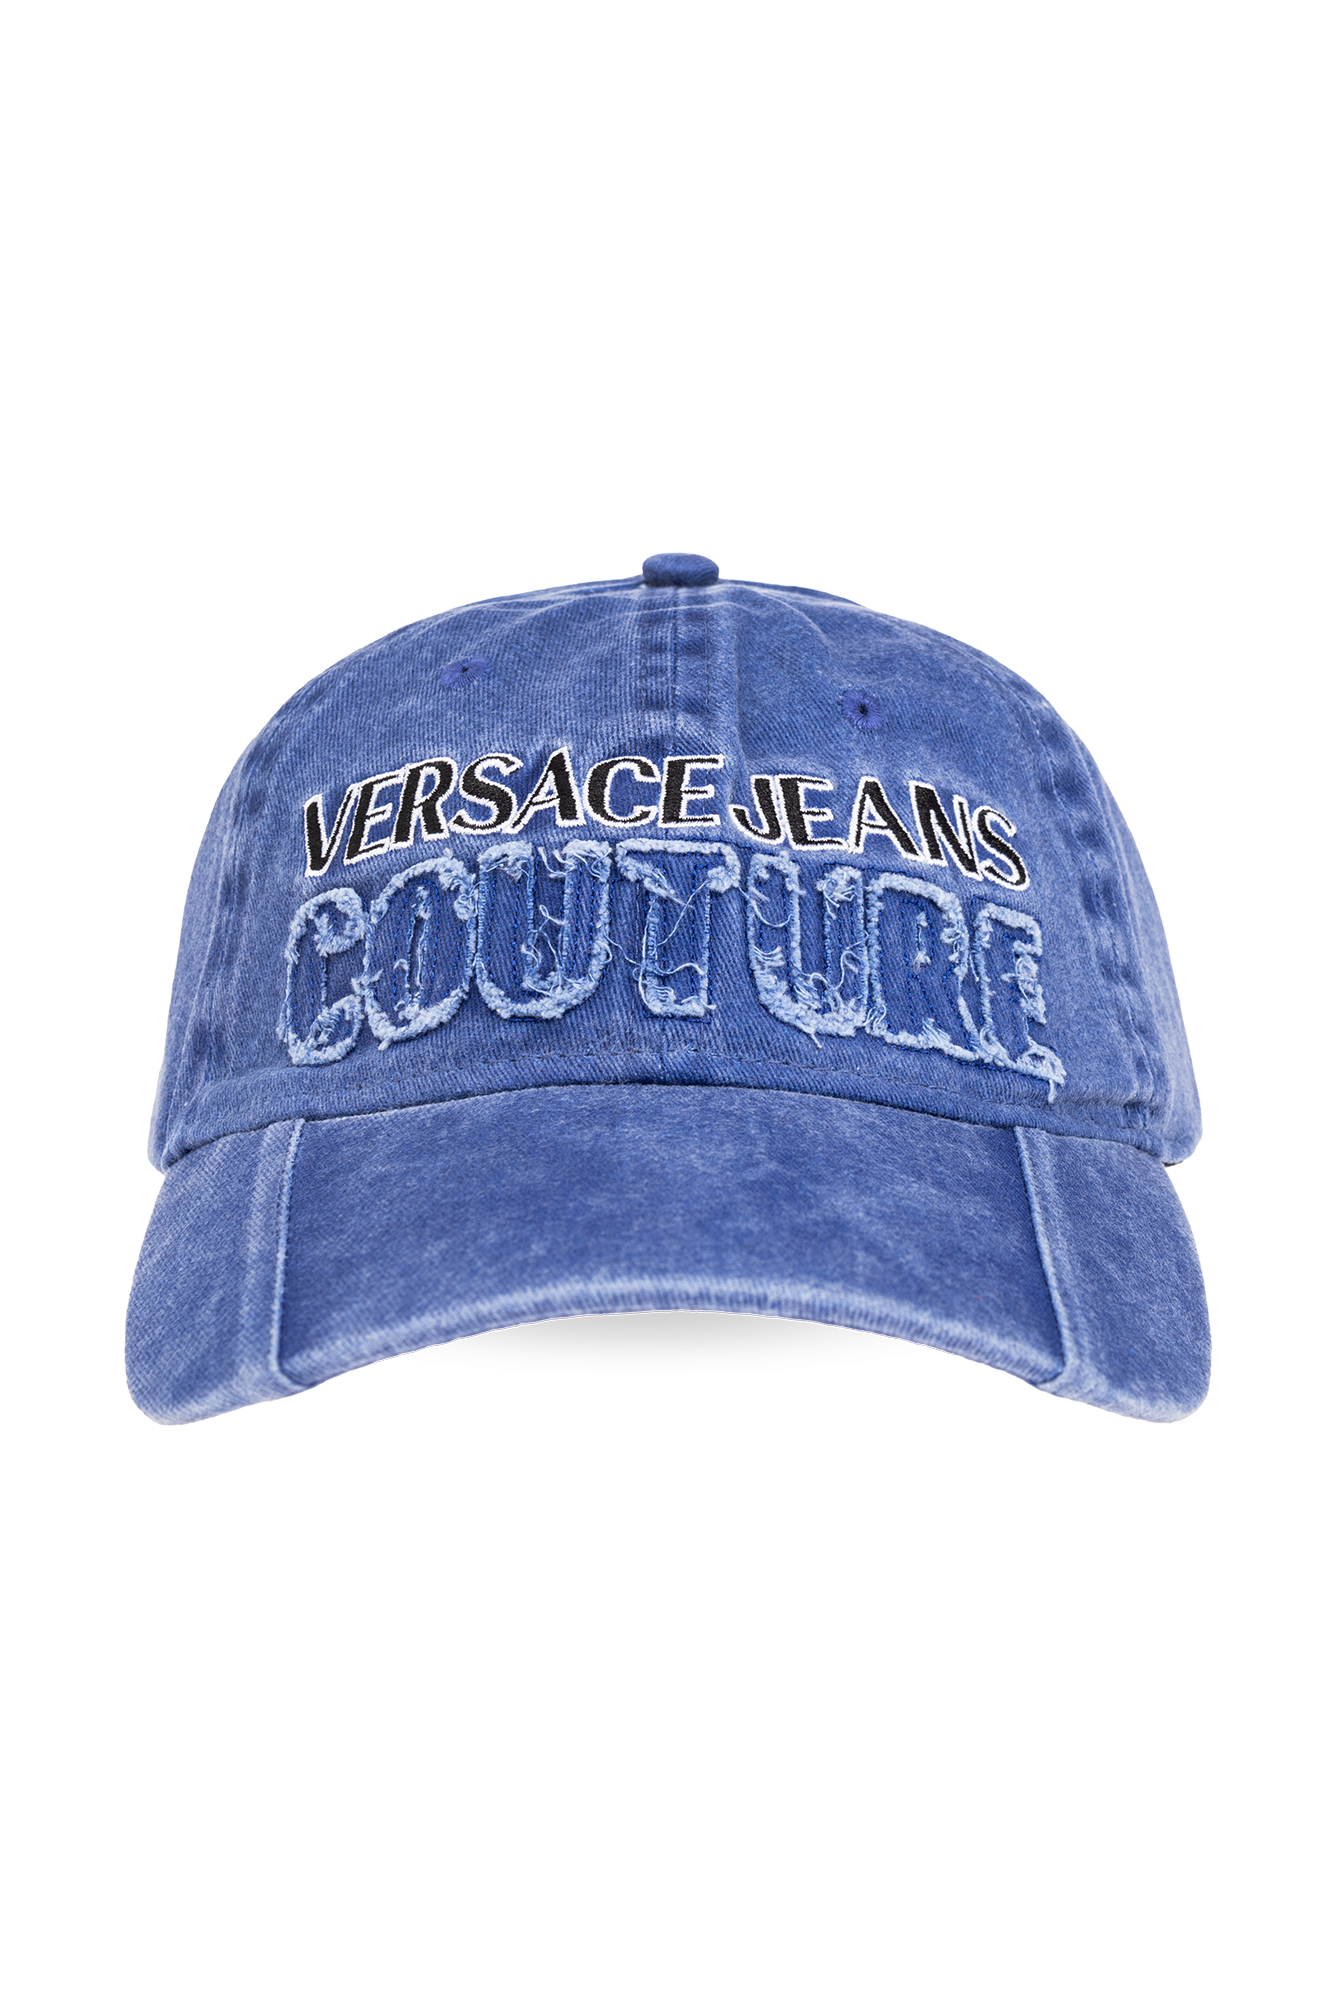 Versace Jeans Couture big pony polo cap kids